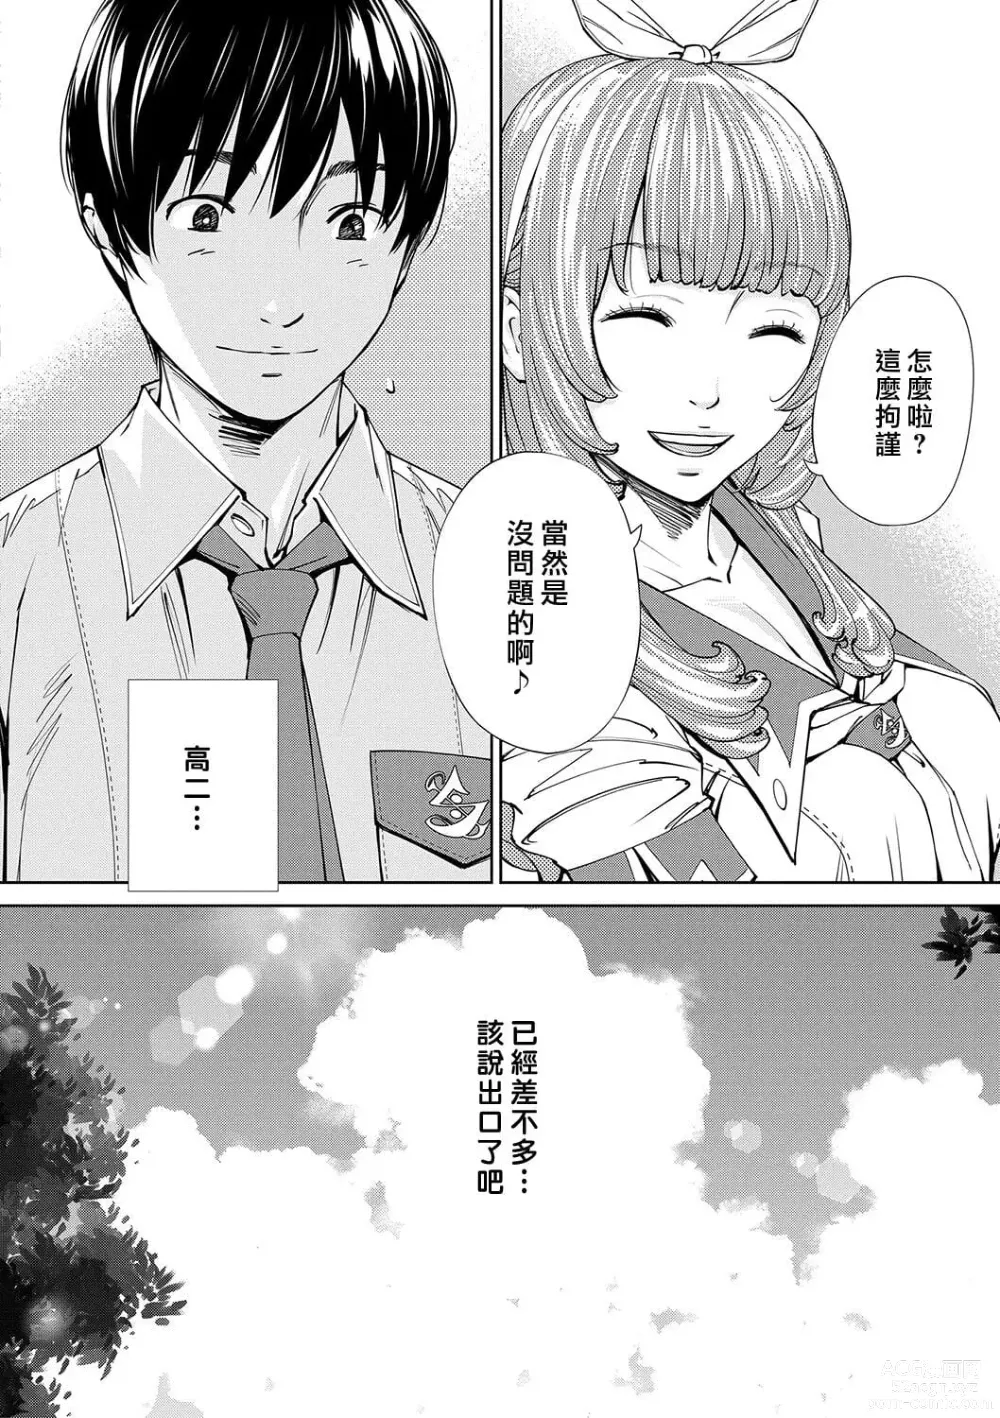 Page 6 of doujinshi 千歳+有罪